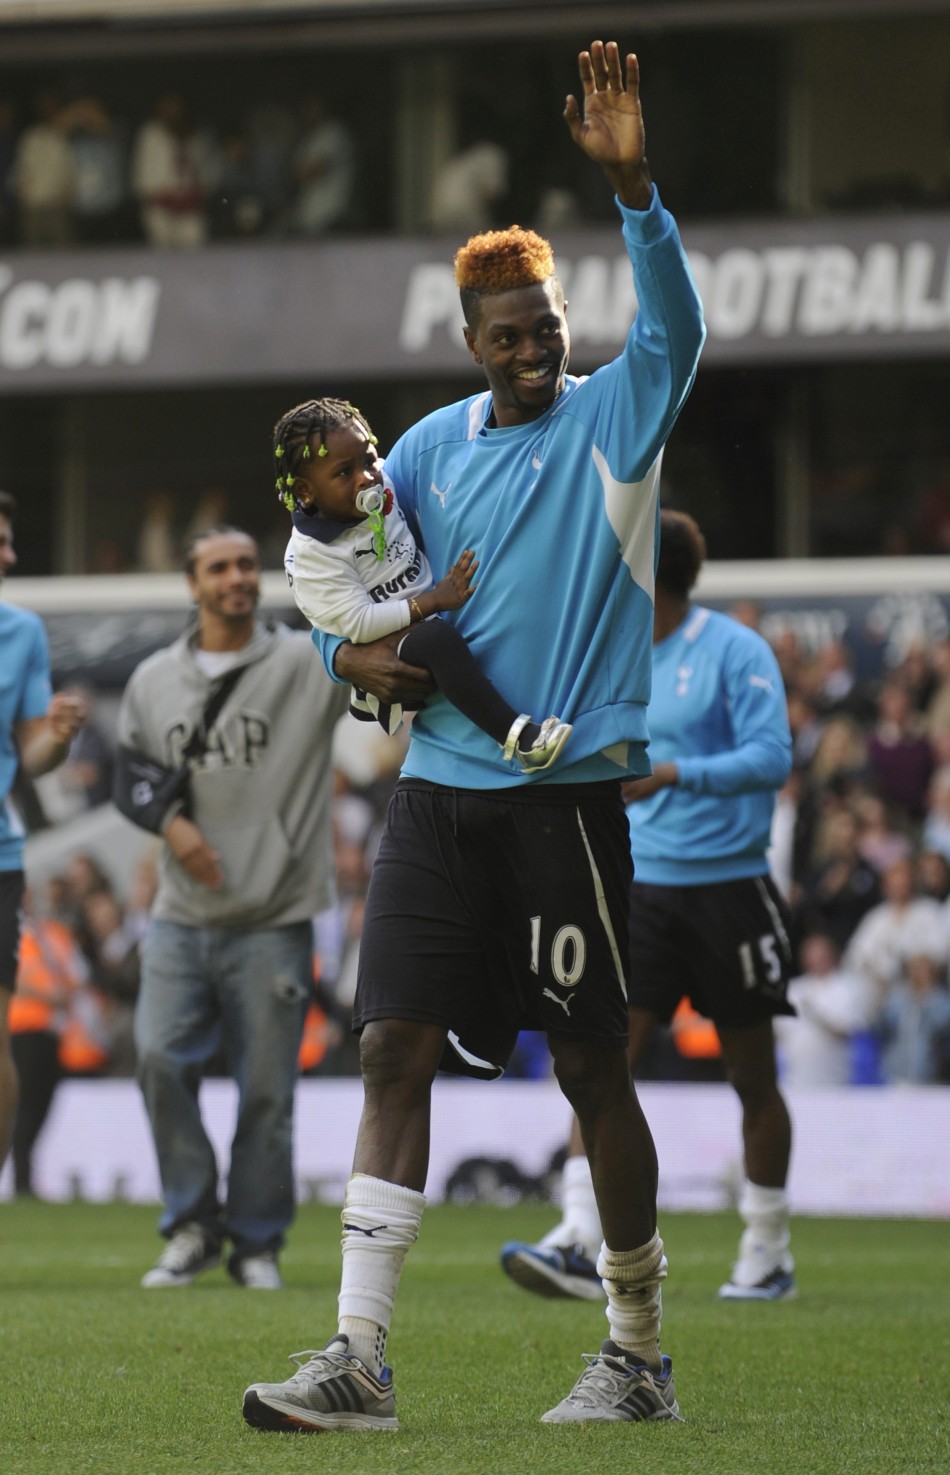 Adebayor, who was on a season-long loan at Tottenham from Manchester City, holds his daughter as he waves to fans after the English Premier League match against Fulham at White Hart Lane